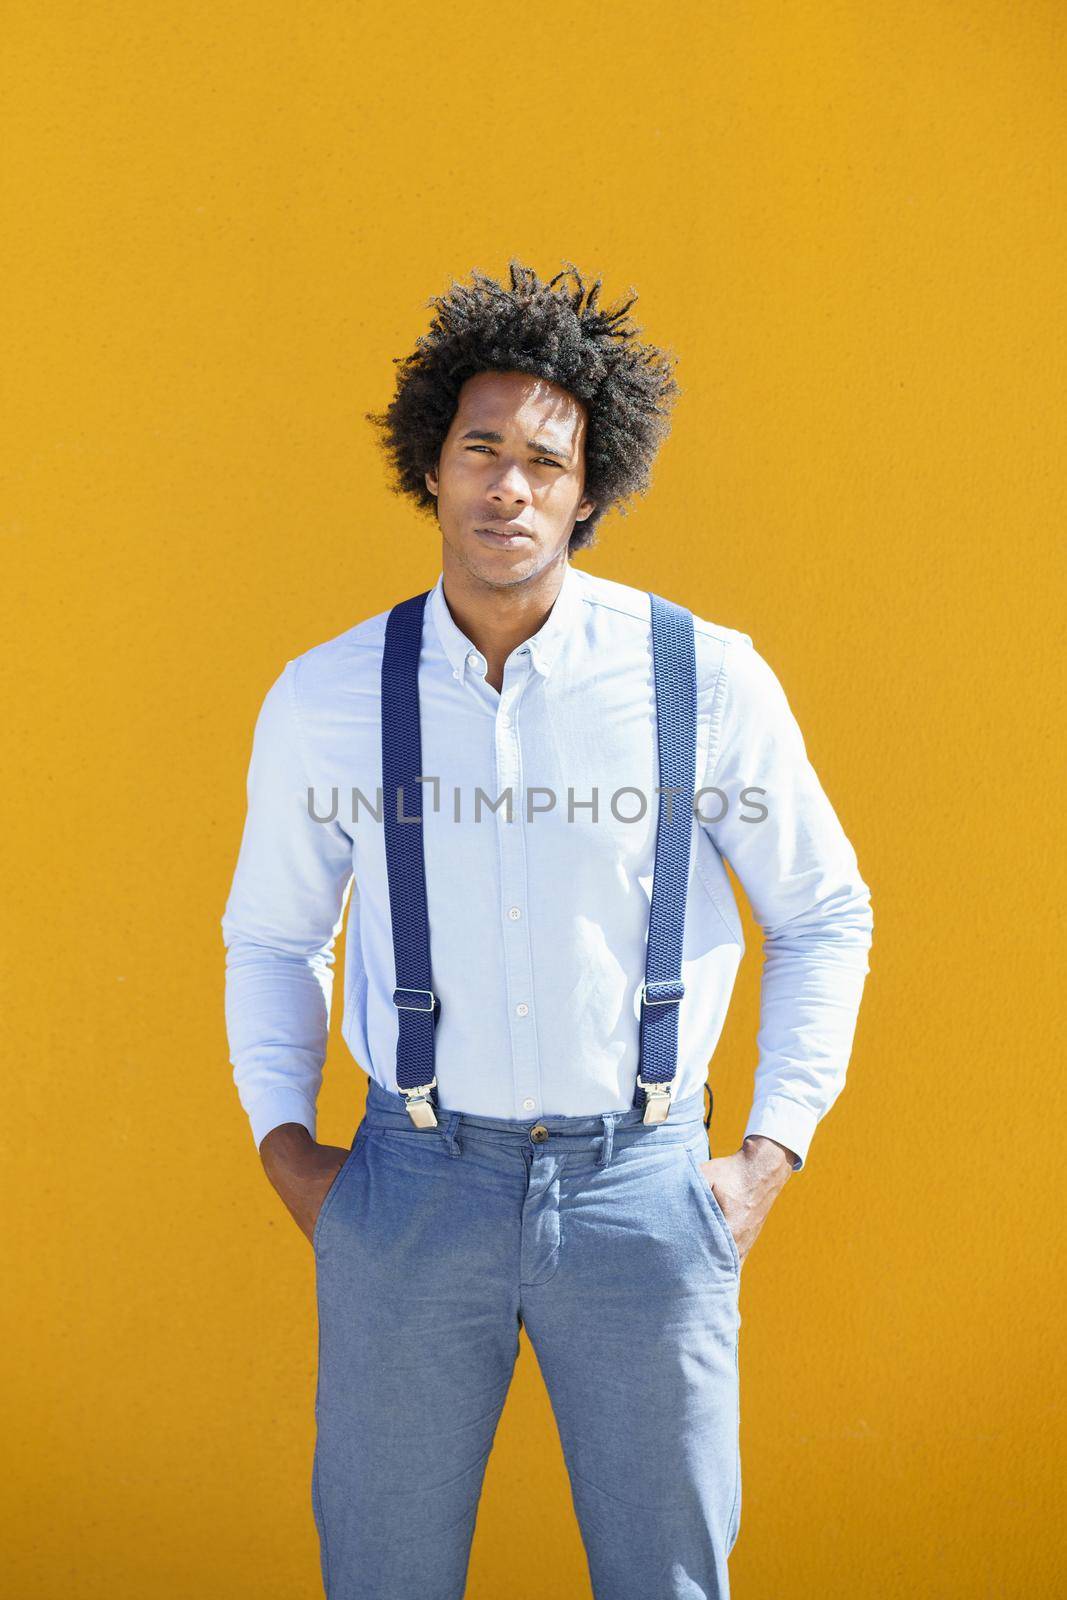 Black man with afro hair on yellow urban background wearing shirt and suspenders. by javiindy